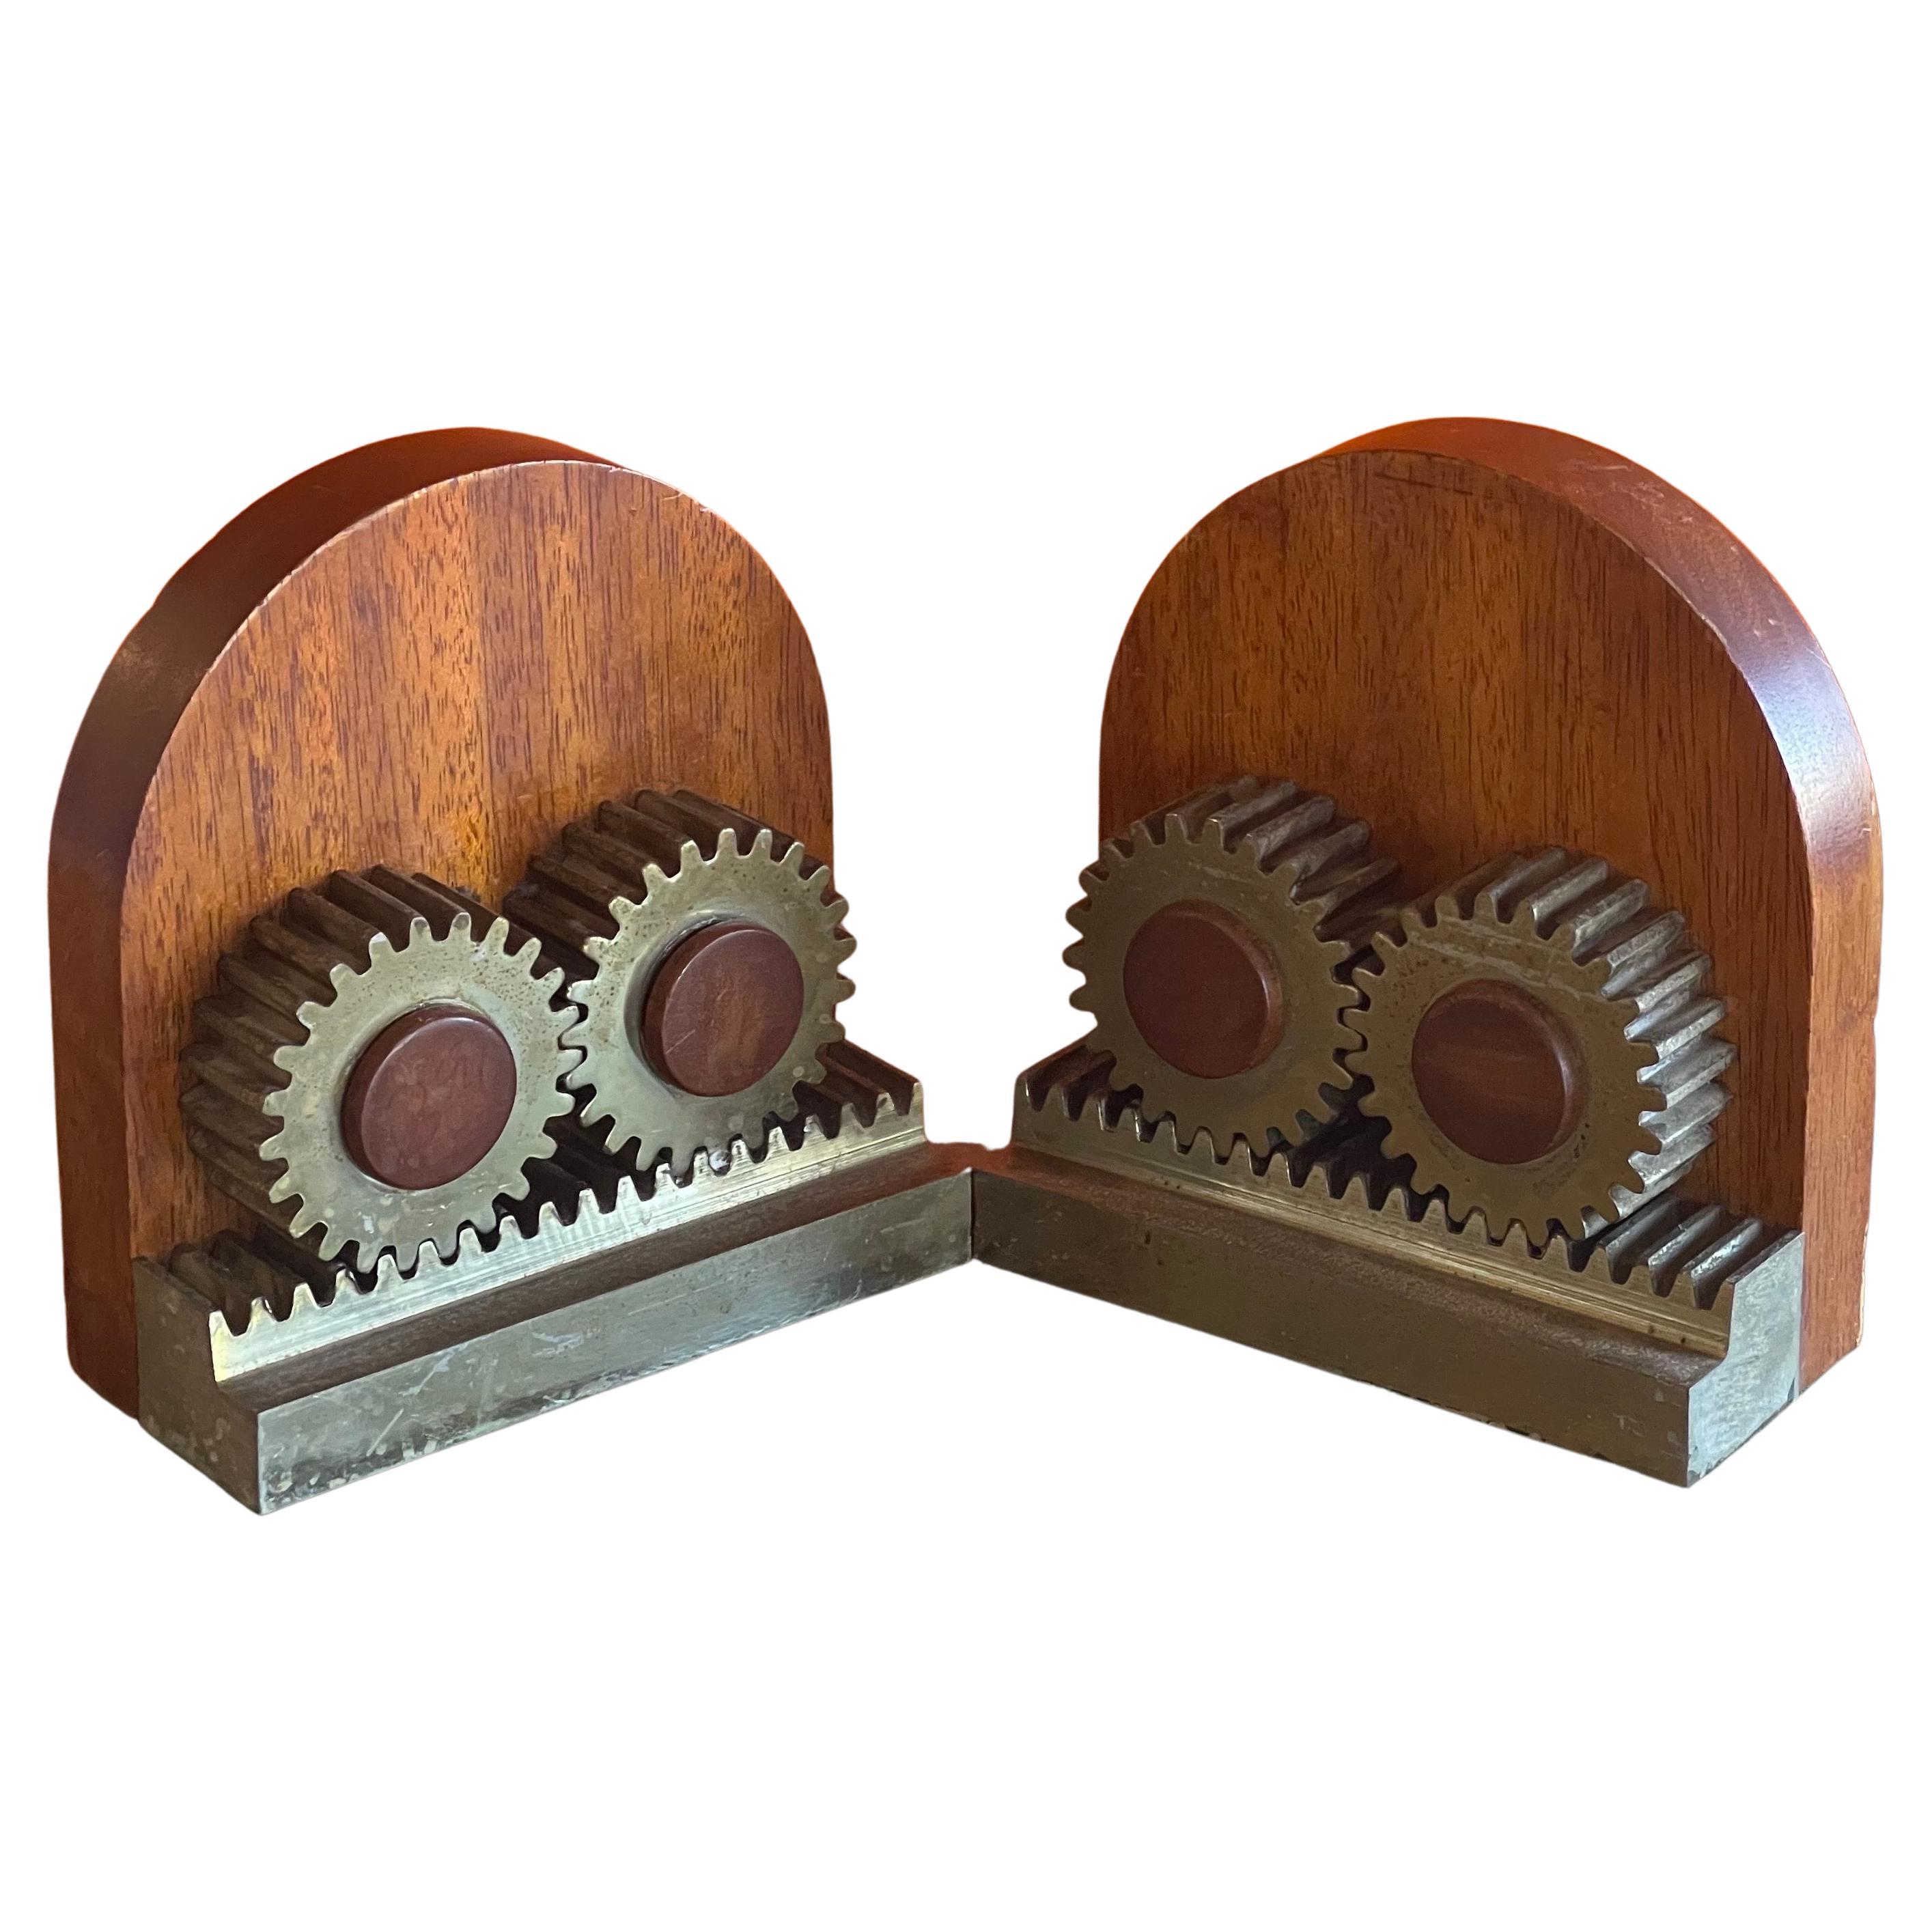 Unique pair of machine gge Art Deco gear bookends, circa 1940s. The bookends are made of a solid hard wood with aluminum and brass 